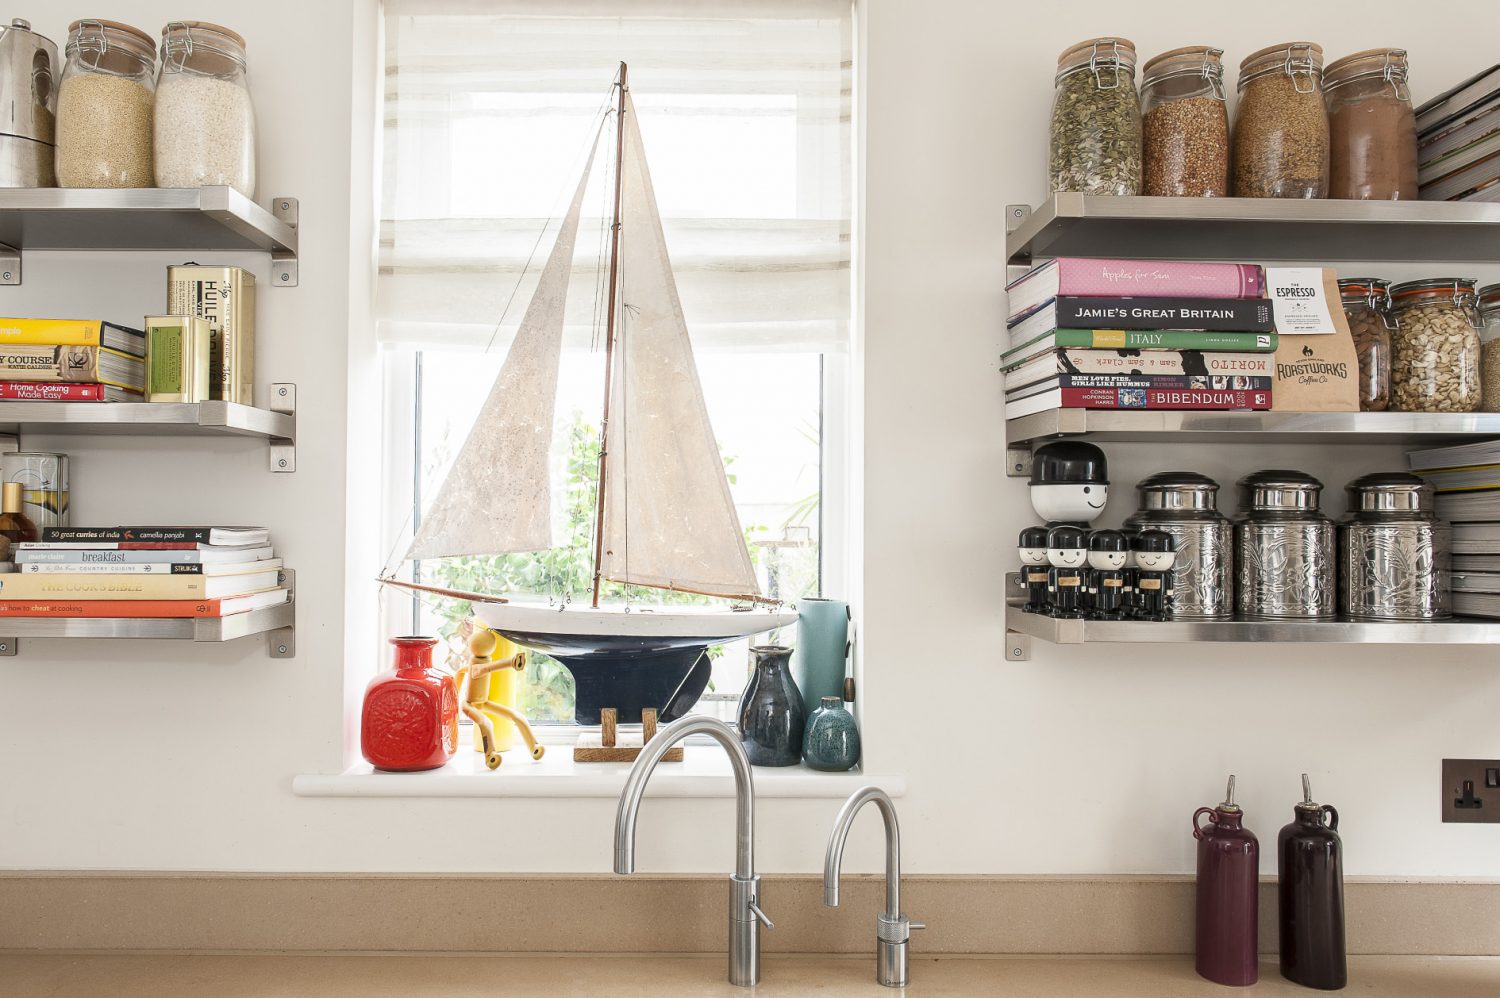 The neutral, simple kitchen units are from Krieder in Tunbridge Wells with open shelving as a design feature in itself and home to colourful ingredients and recipes books, as well as a collection of retro Homepride ‘Freds’